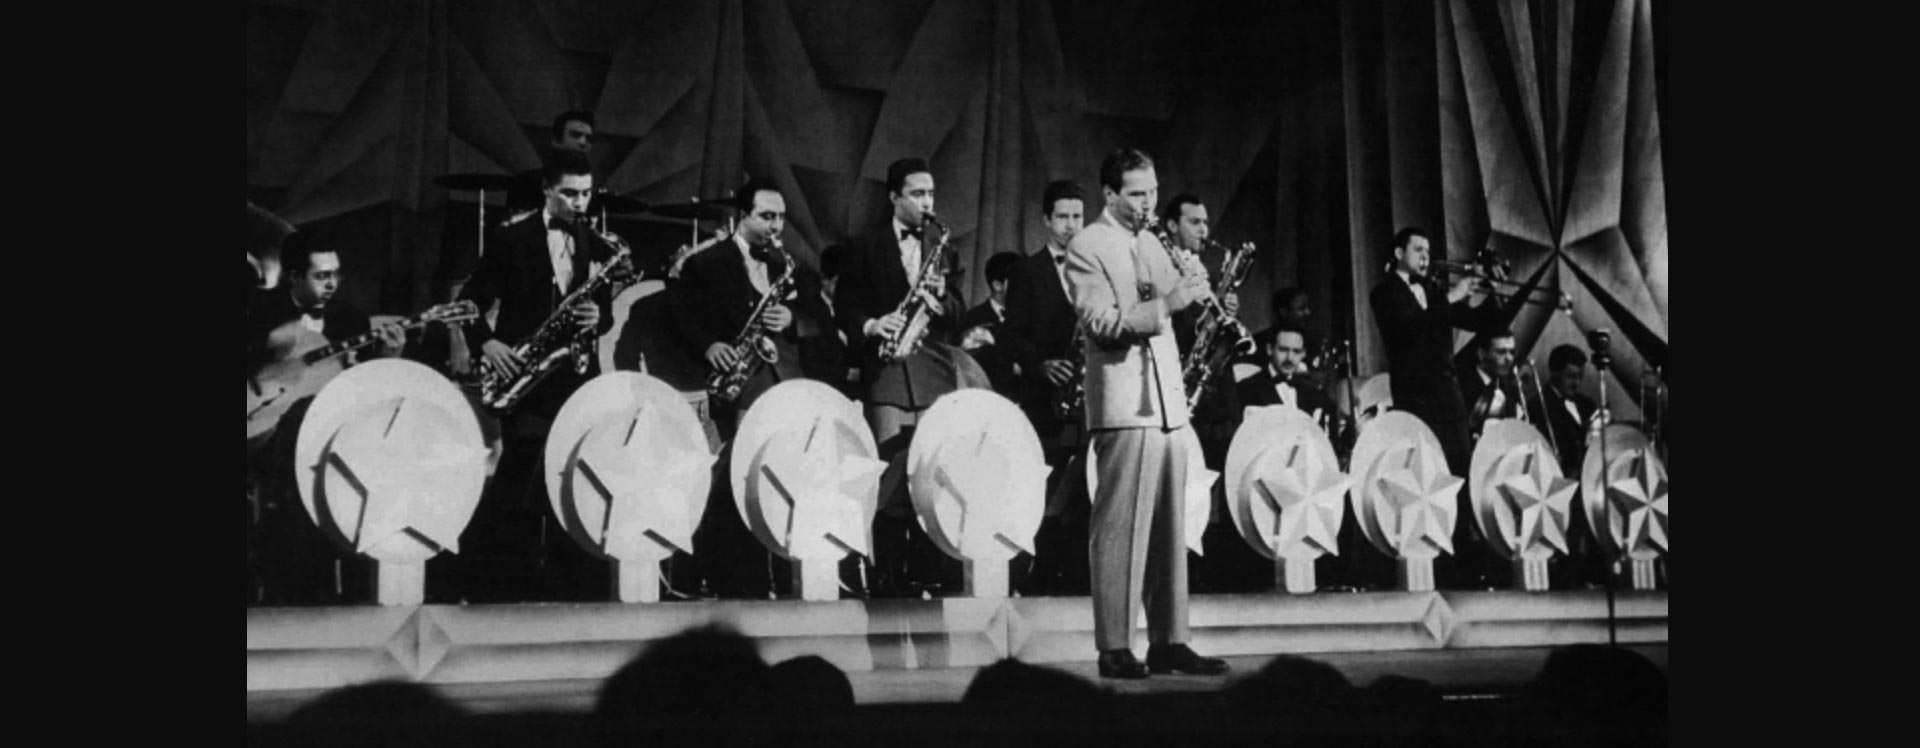 Artie Shaw and the band onstage 1945